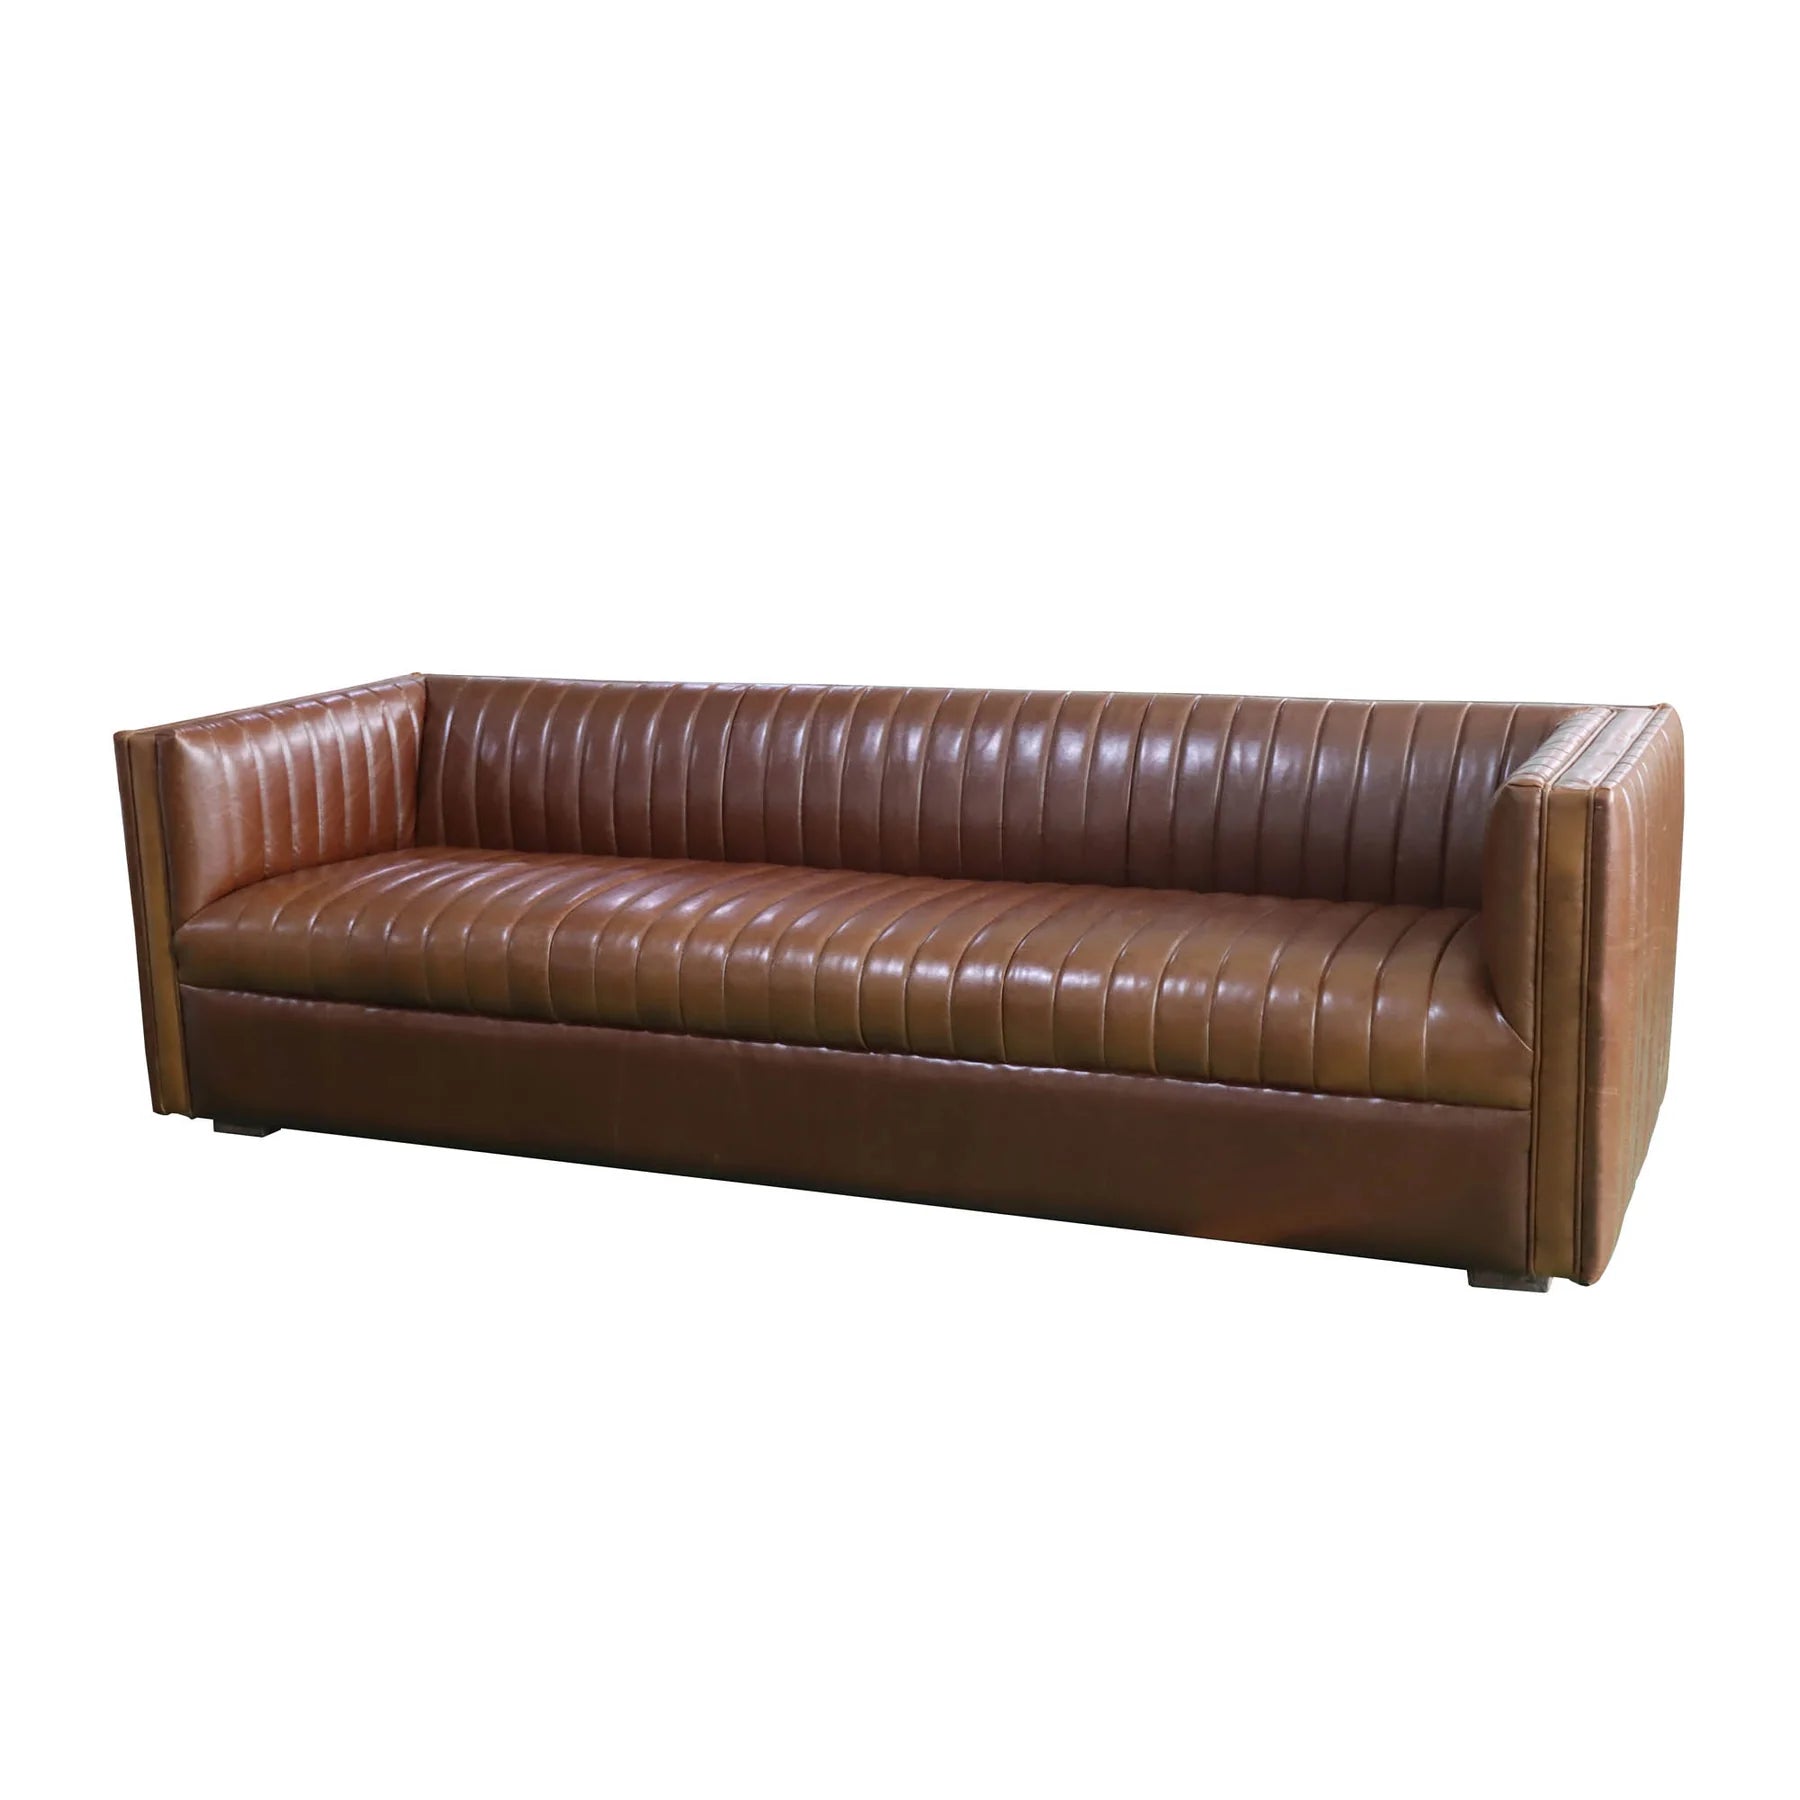 Channel Sofa- Camel Brown Leather